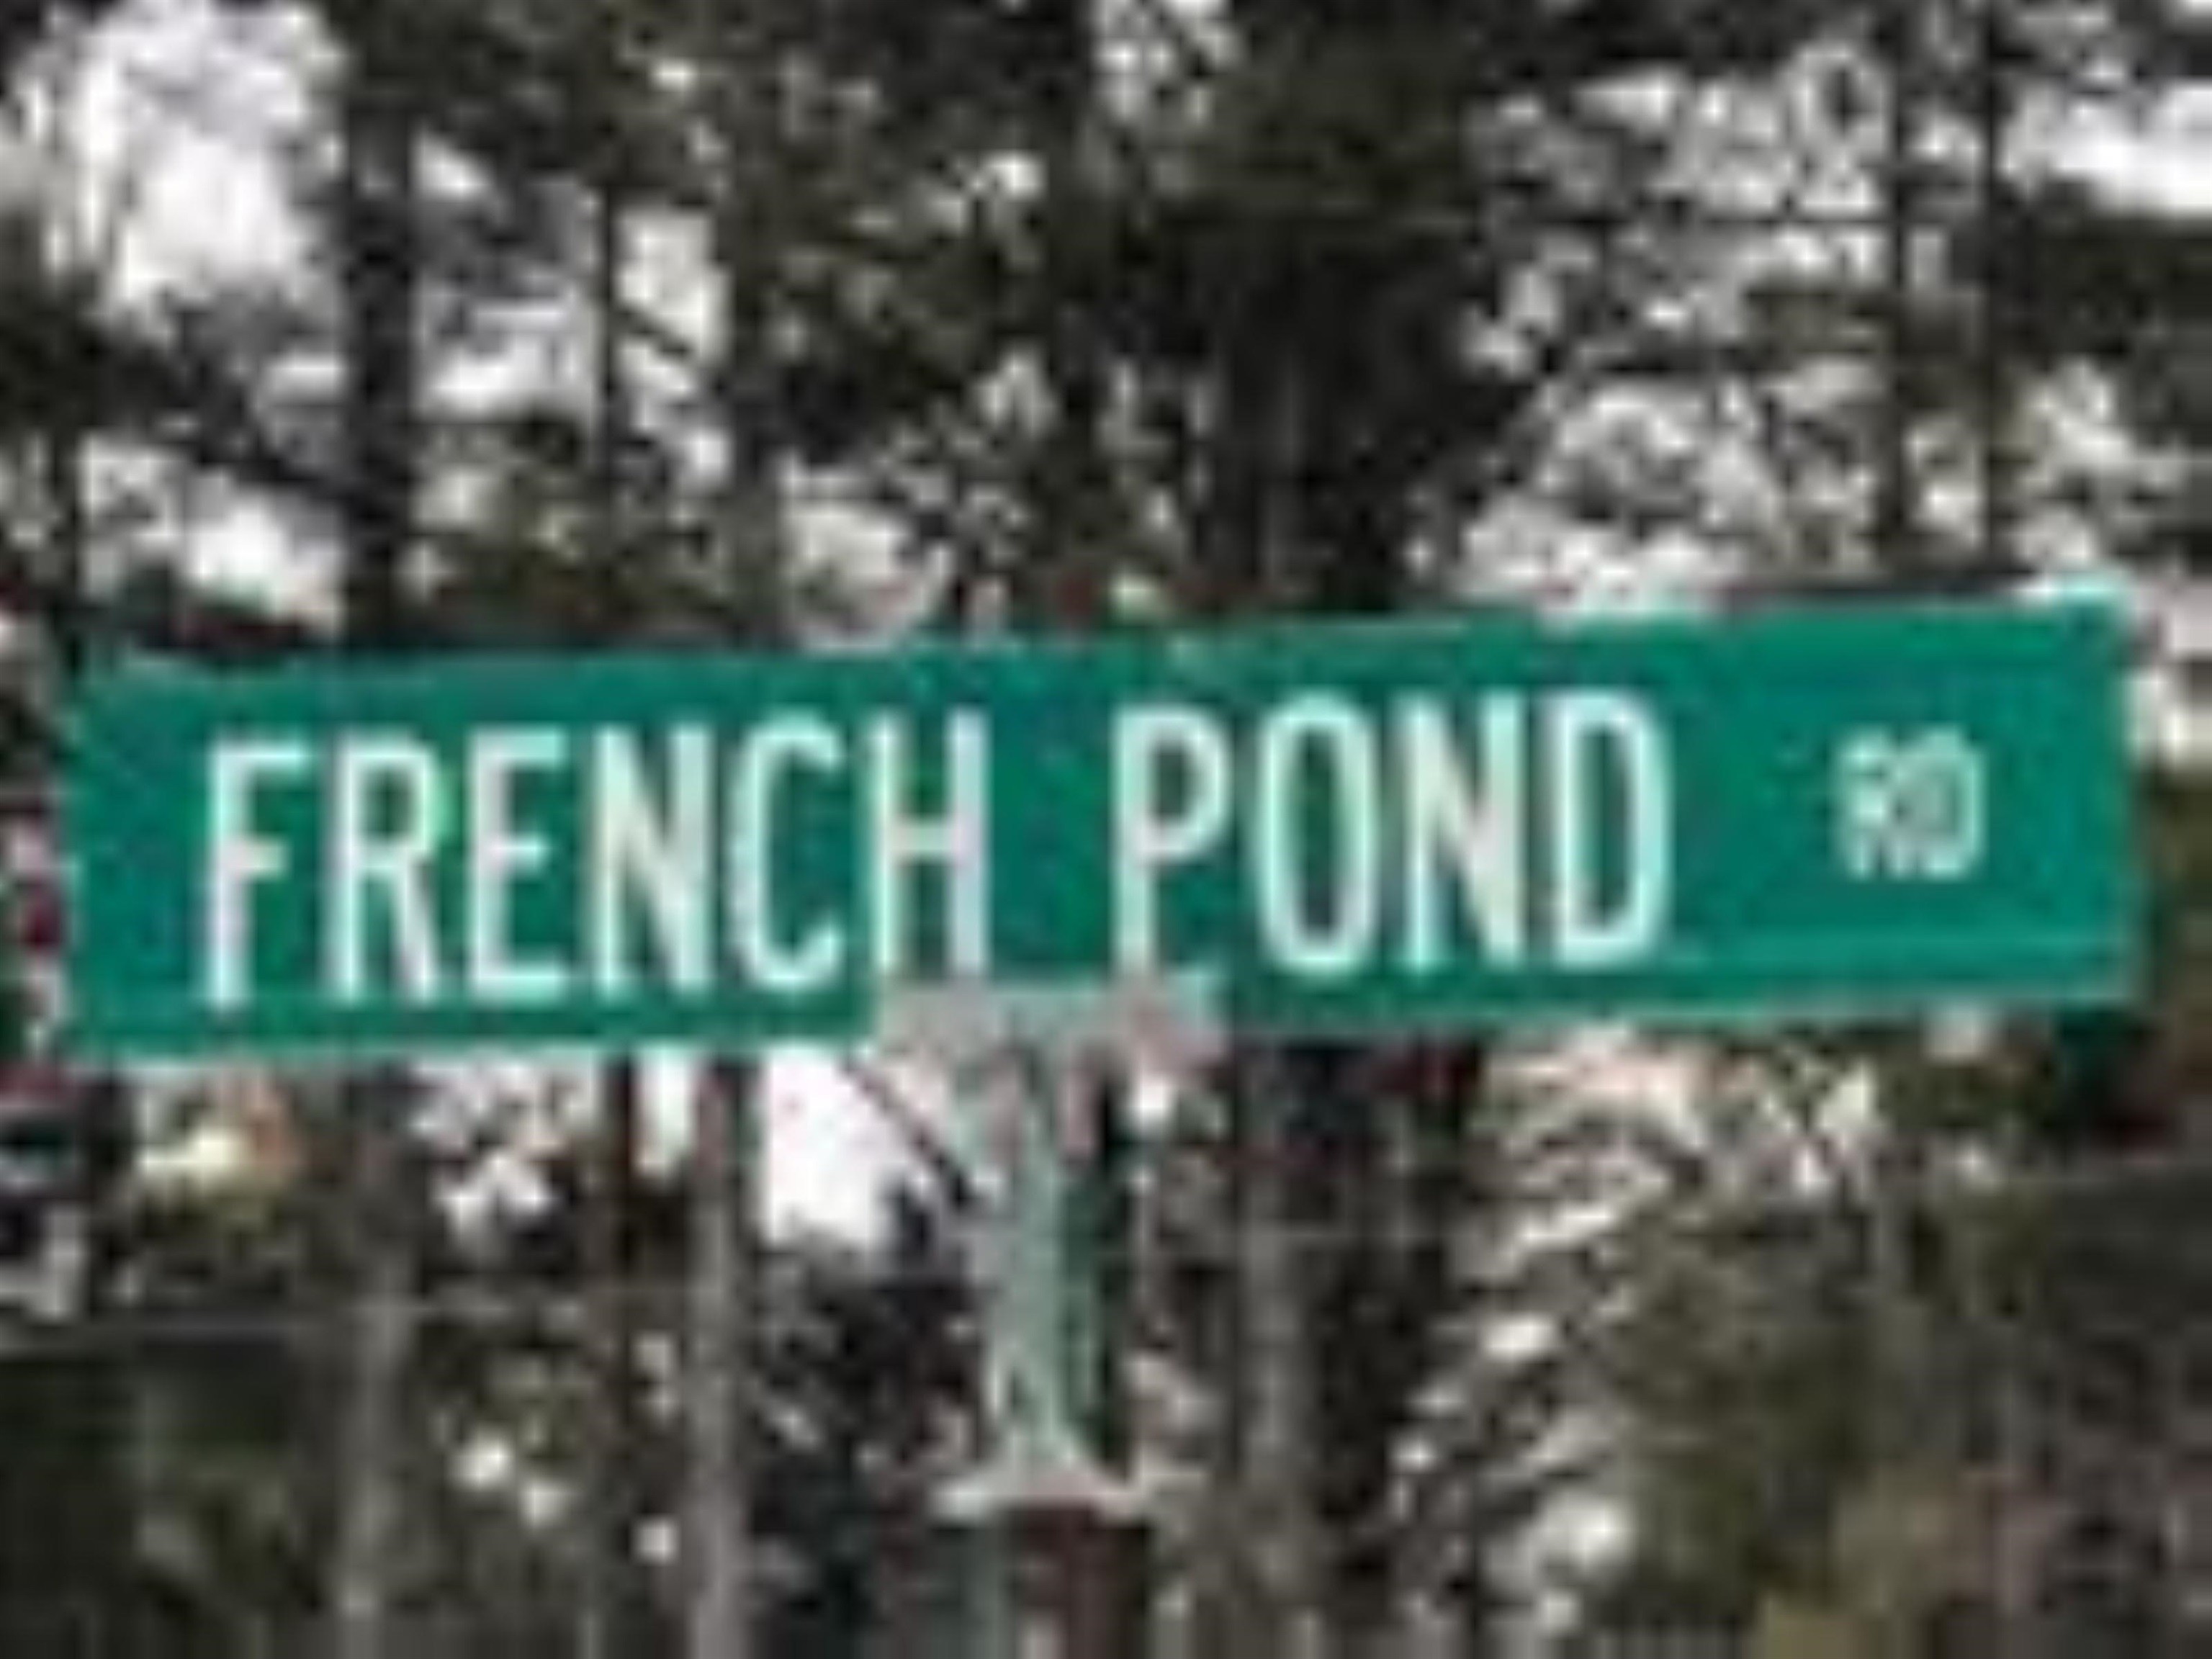 2. French Pond Road